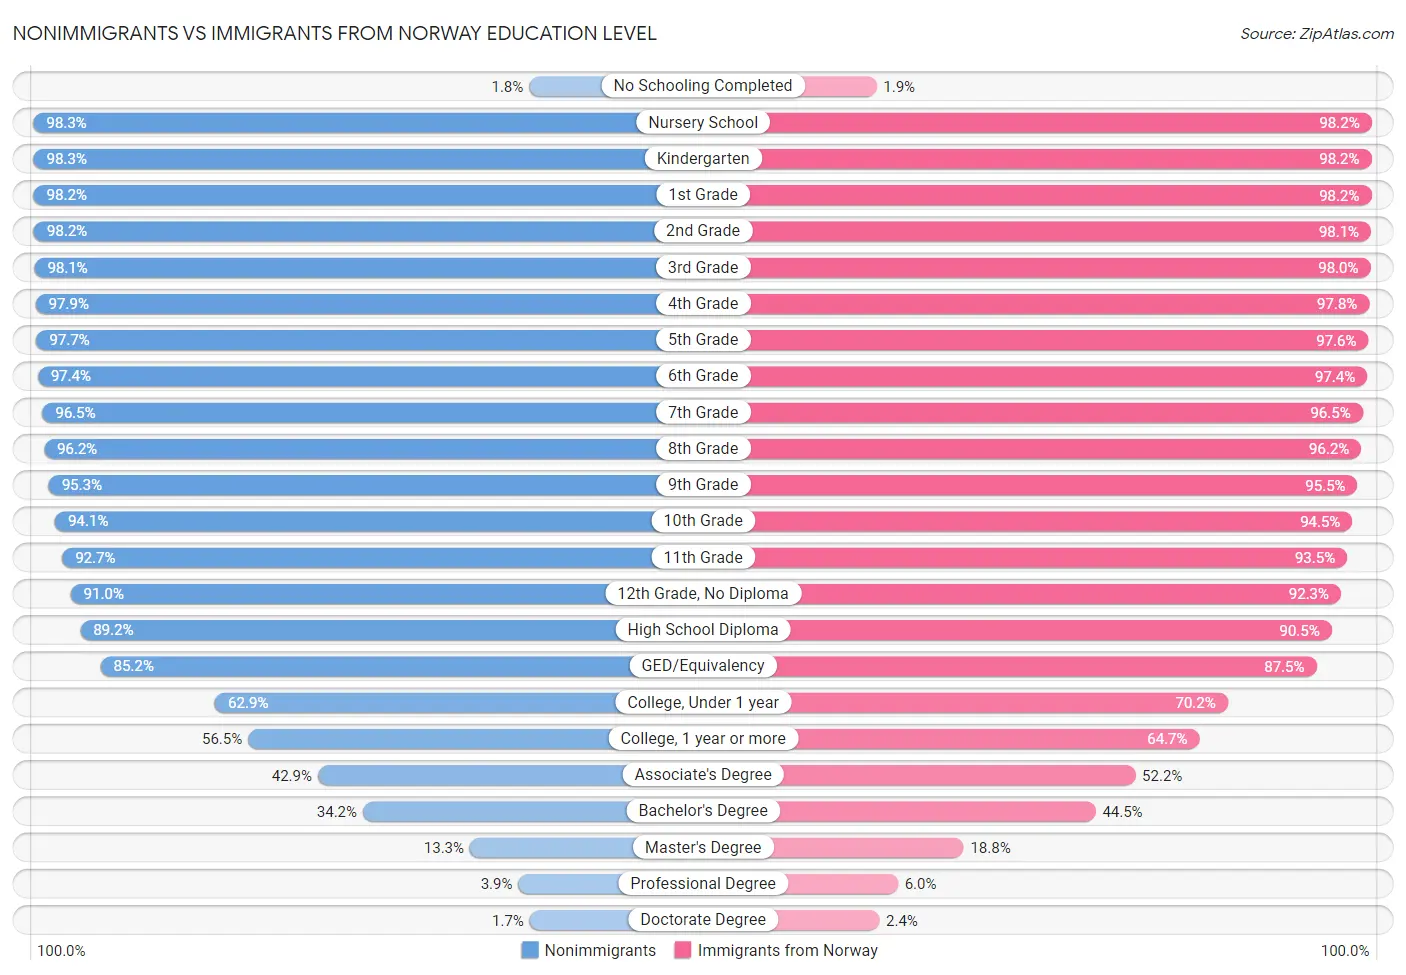 Nonimmigrants vs Immigrants from Norway Education Level